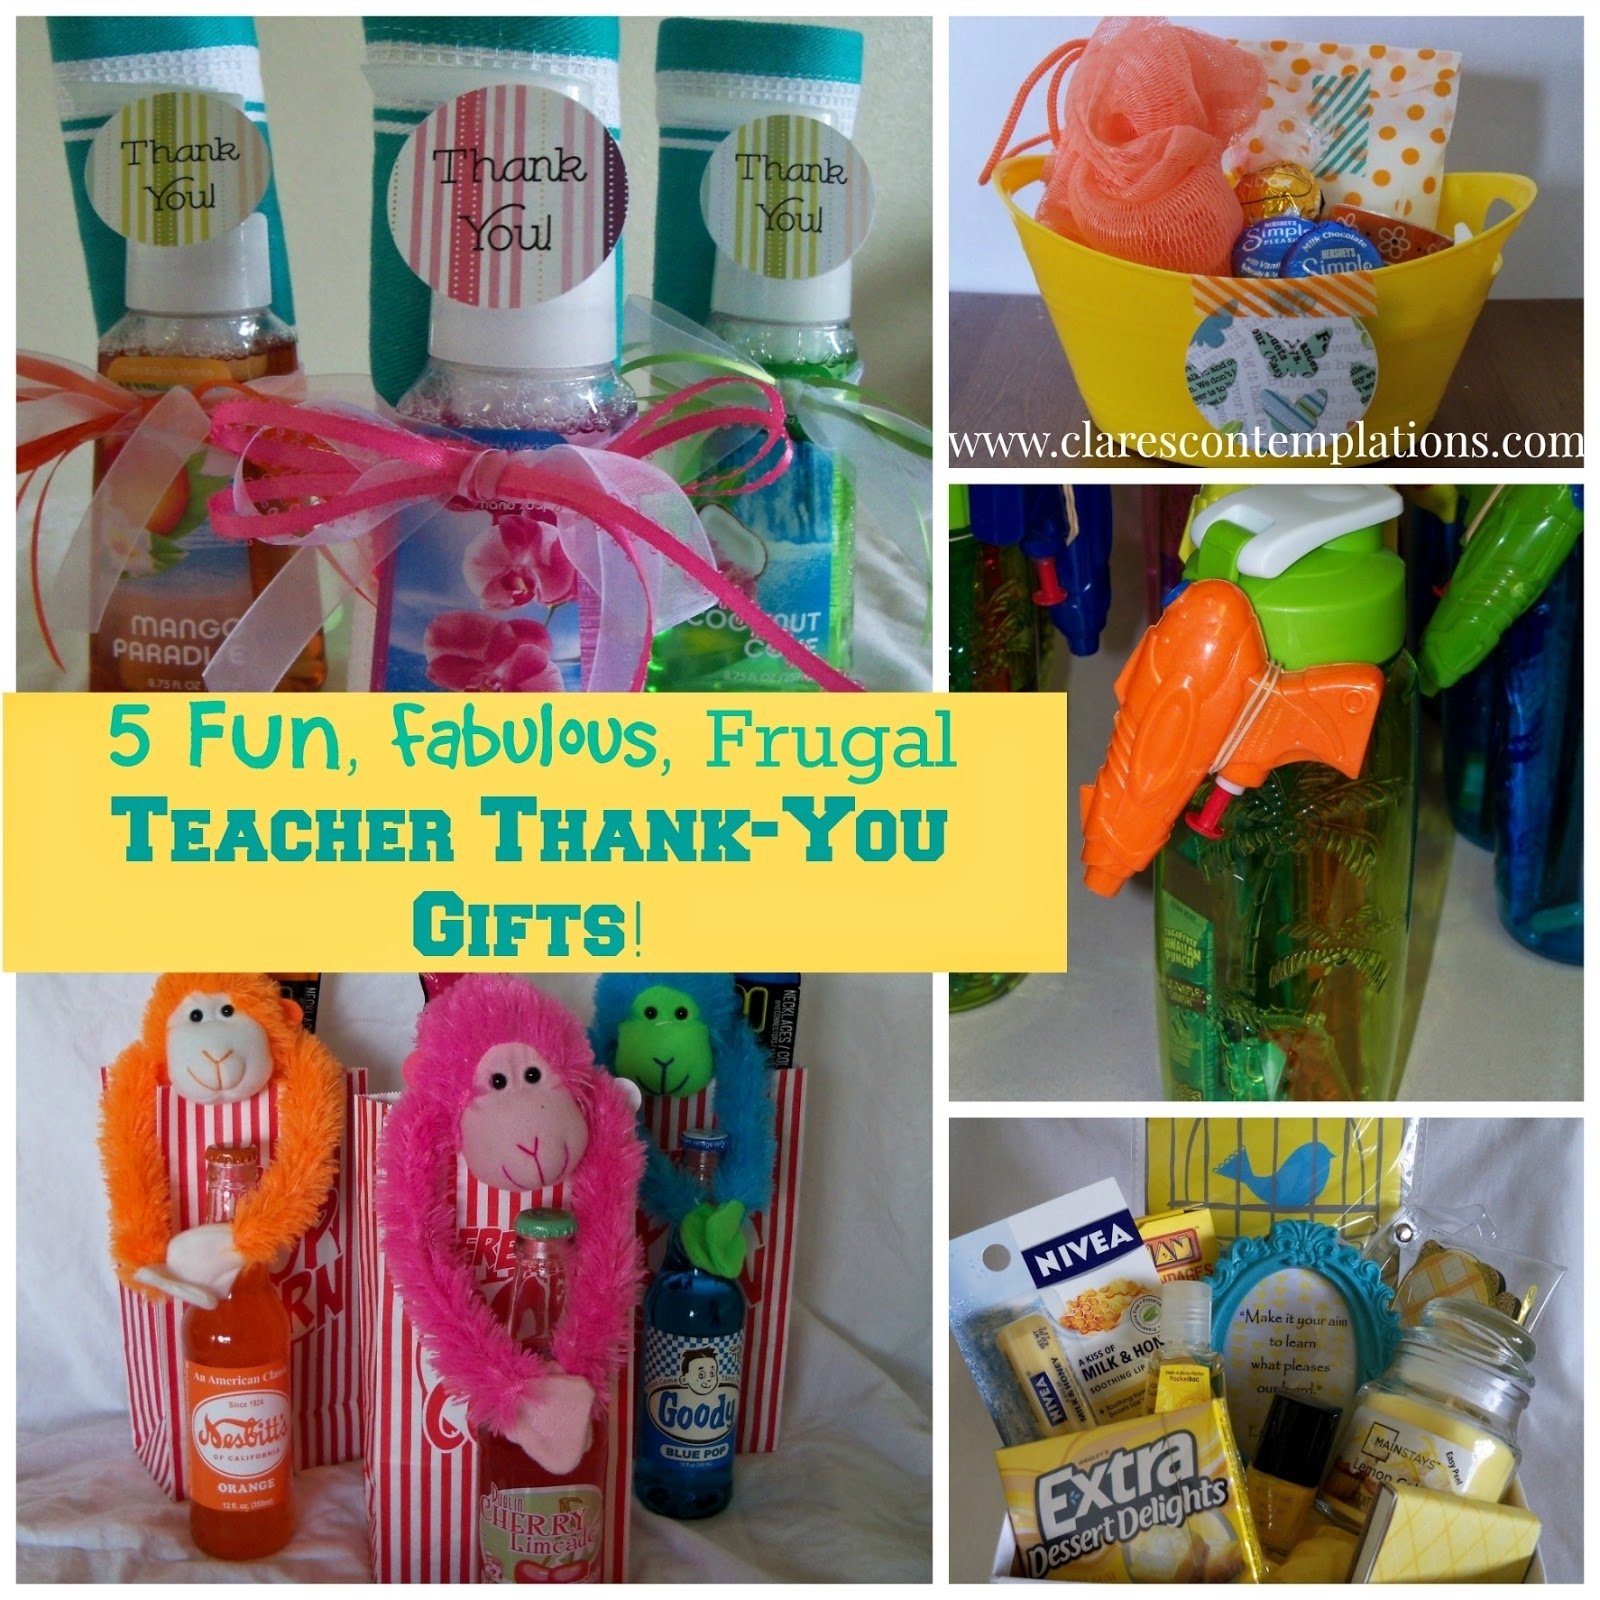 10 Stylish Thank You Gift Ideas For Teachers clares contemplations 5 unique thoughtful and frugal teacher 1 2022